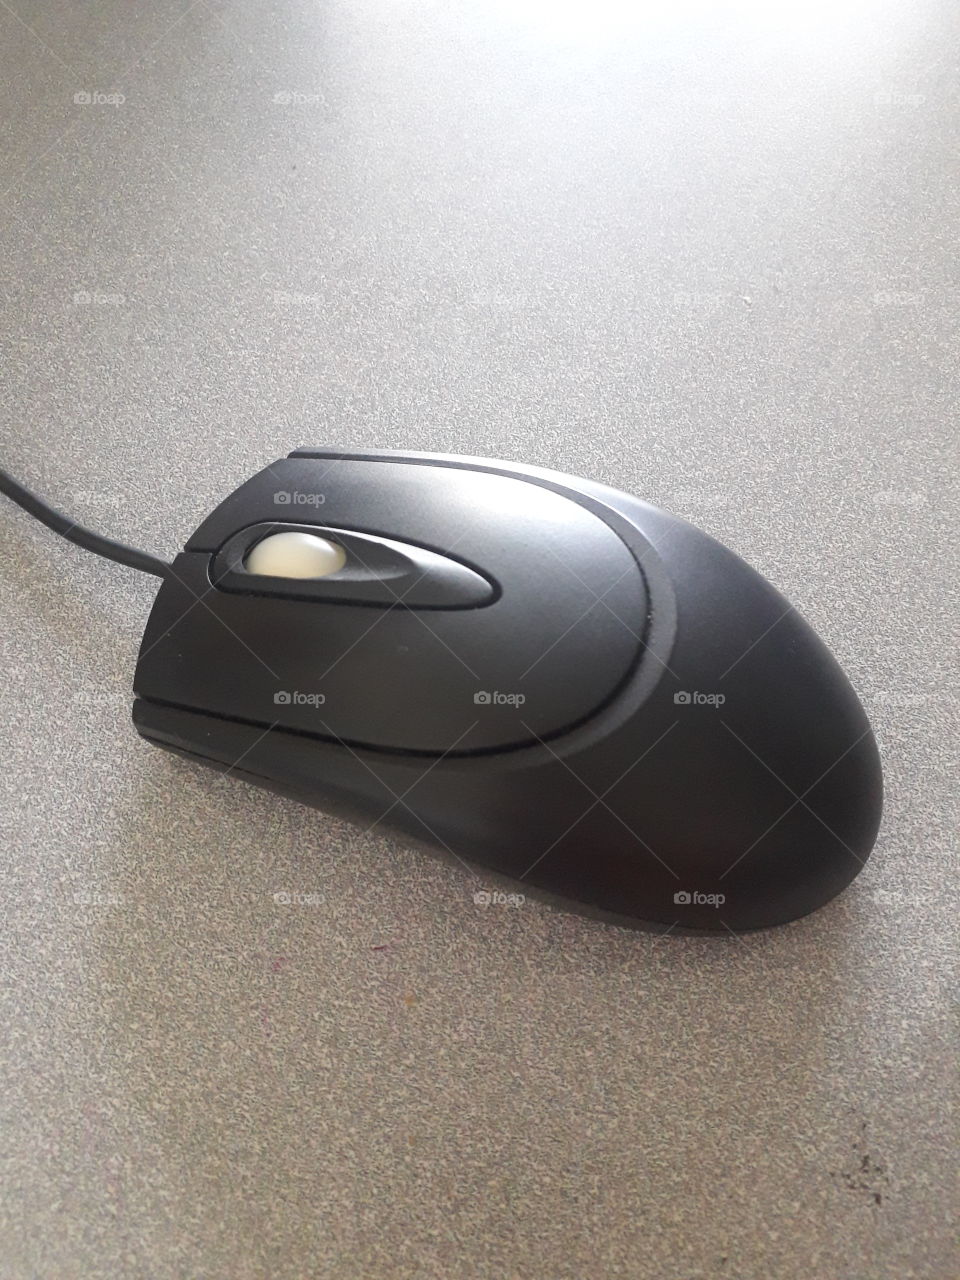 Mouse in an office